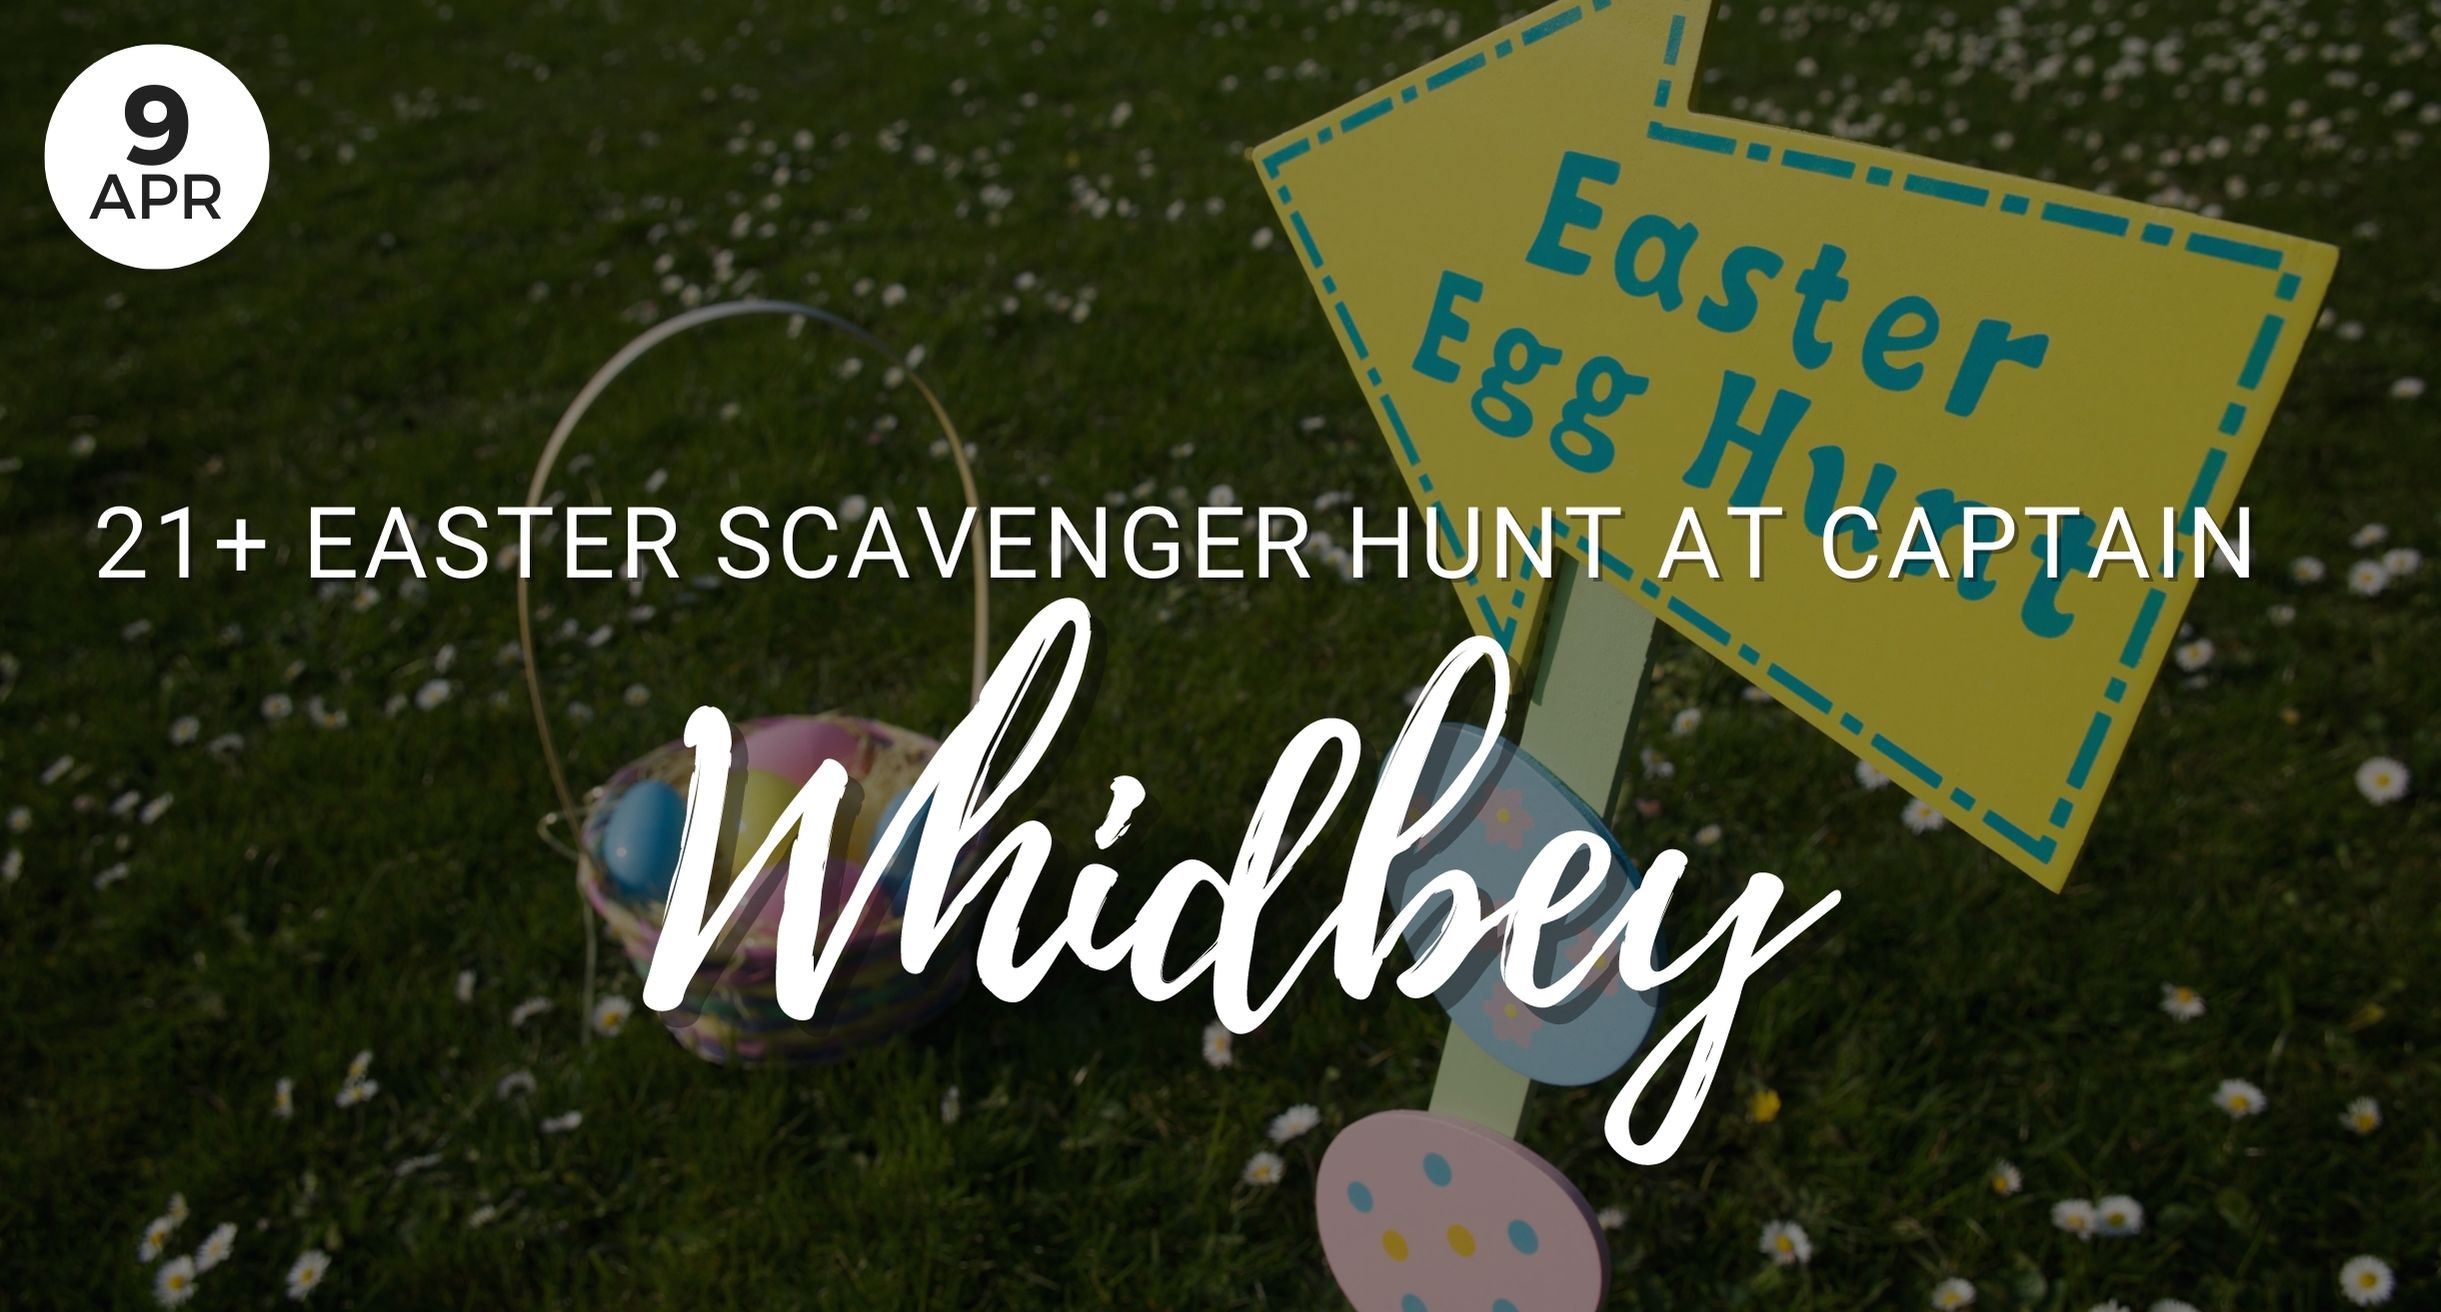 21+ Easter Scavenger Hunt at Captain Whidbey